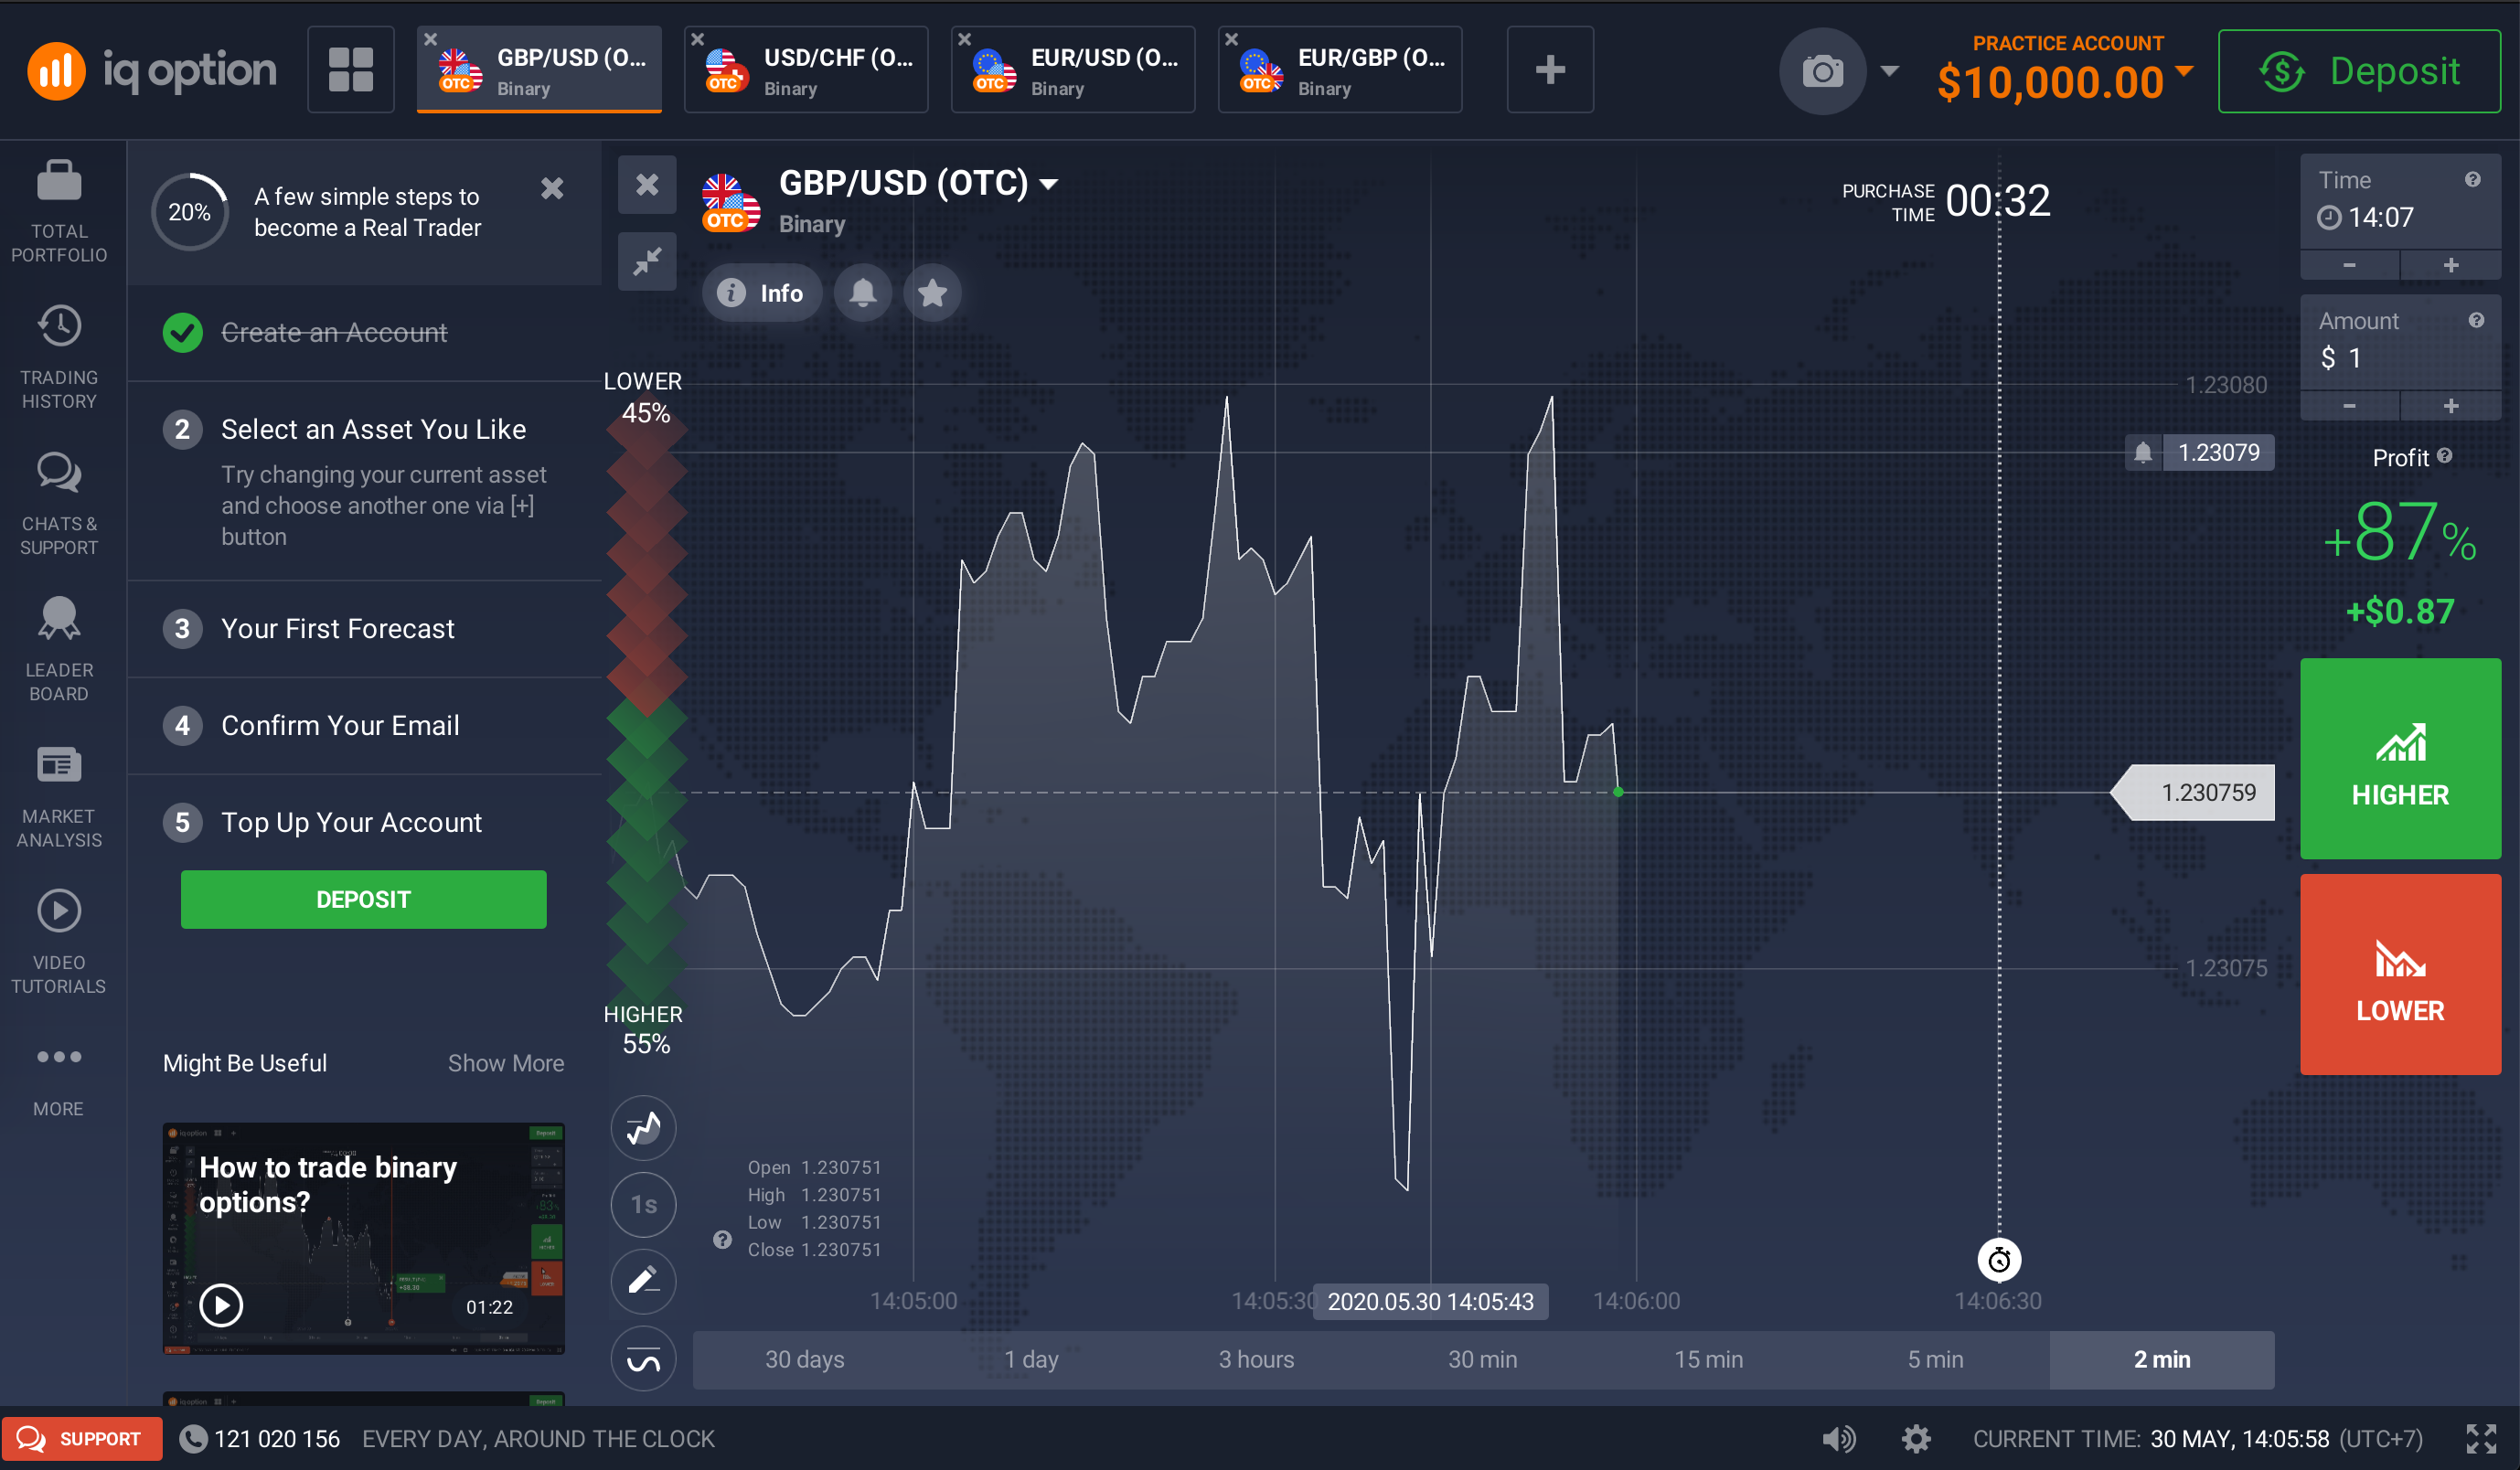 How to use IQ Option – Basic guide for new traders